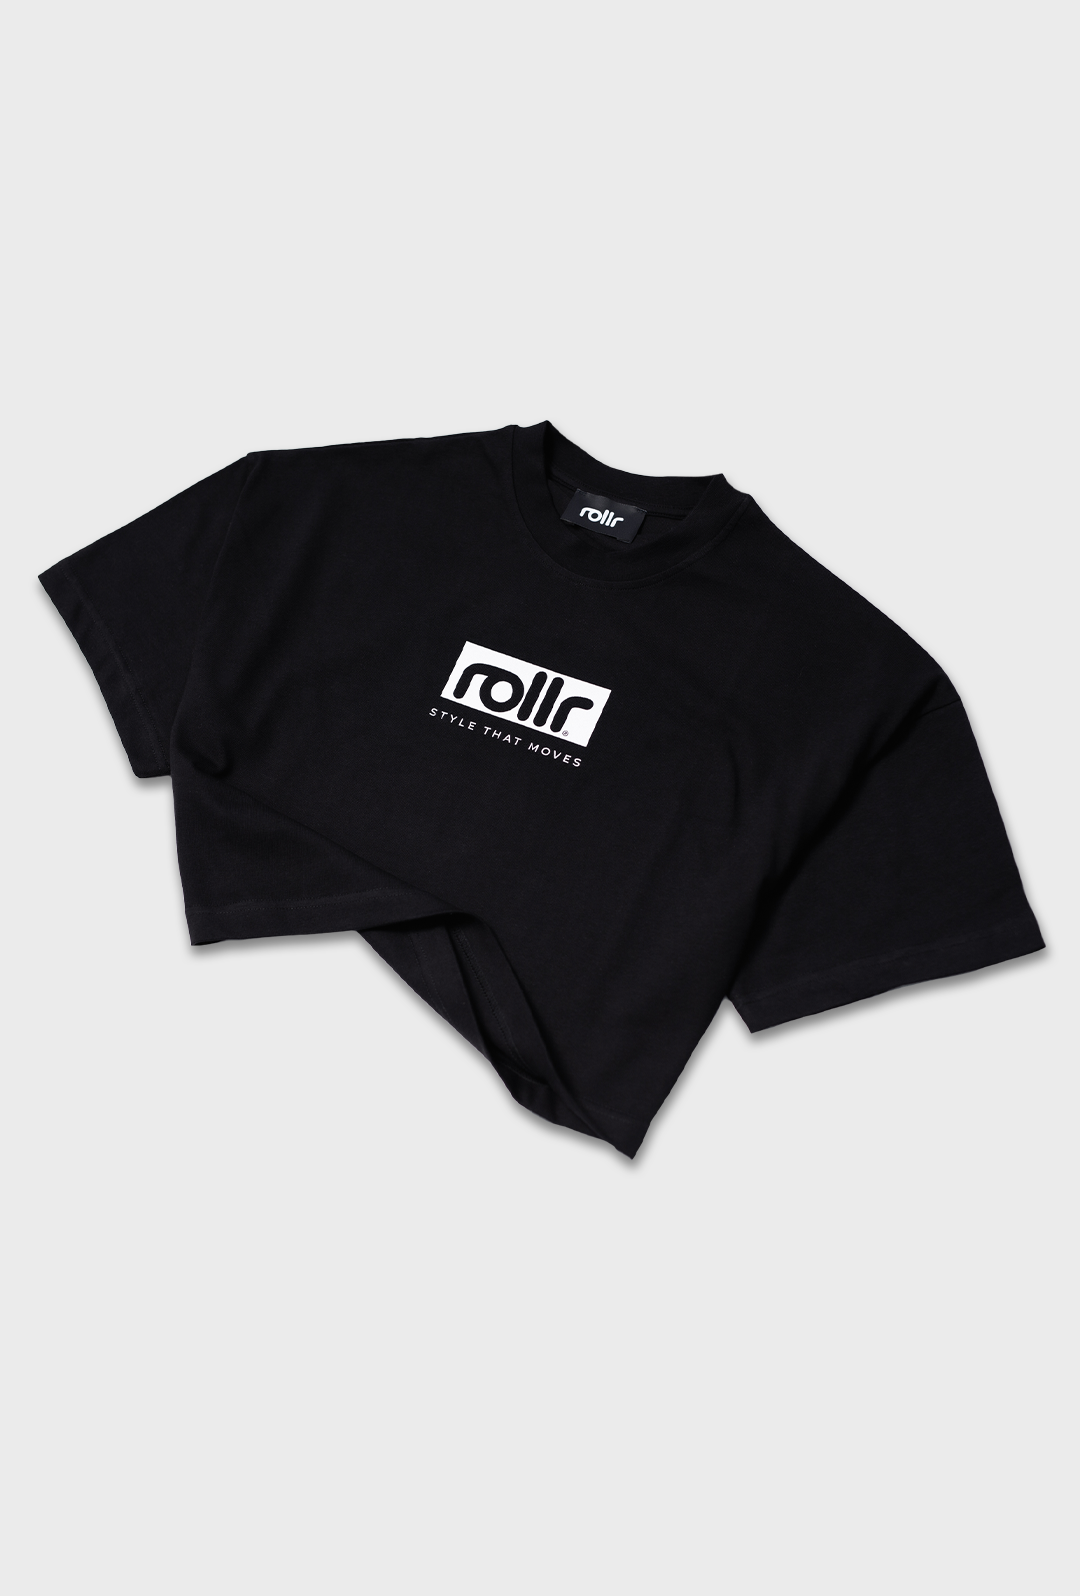 roller cropped women's midnight black cropped tee with roller style that moves luxury fashion skate printed logo